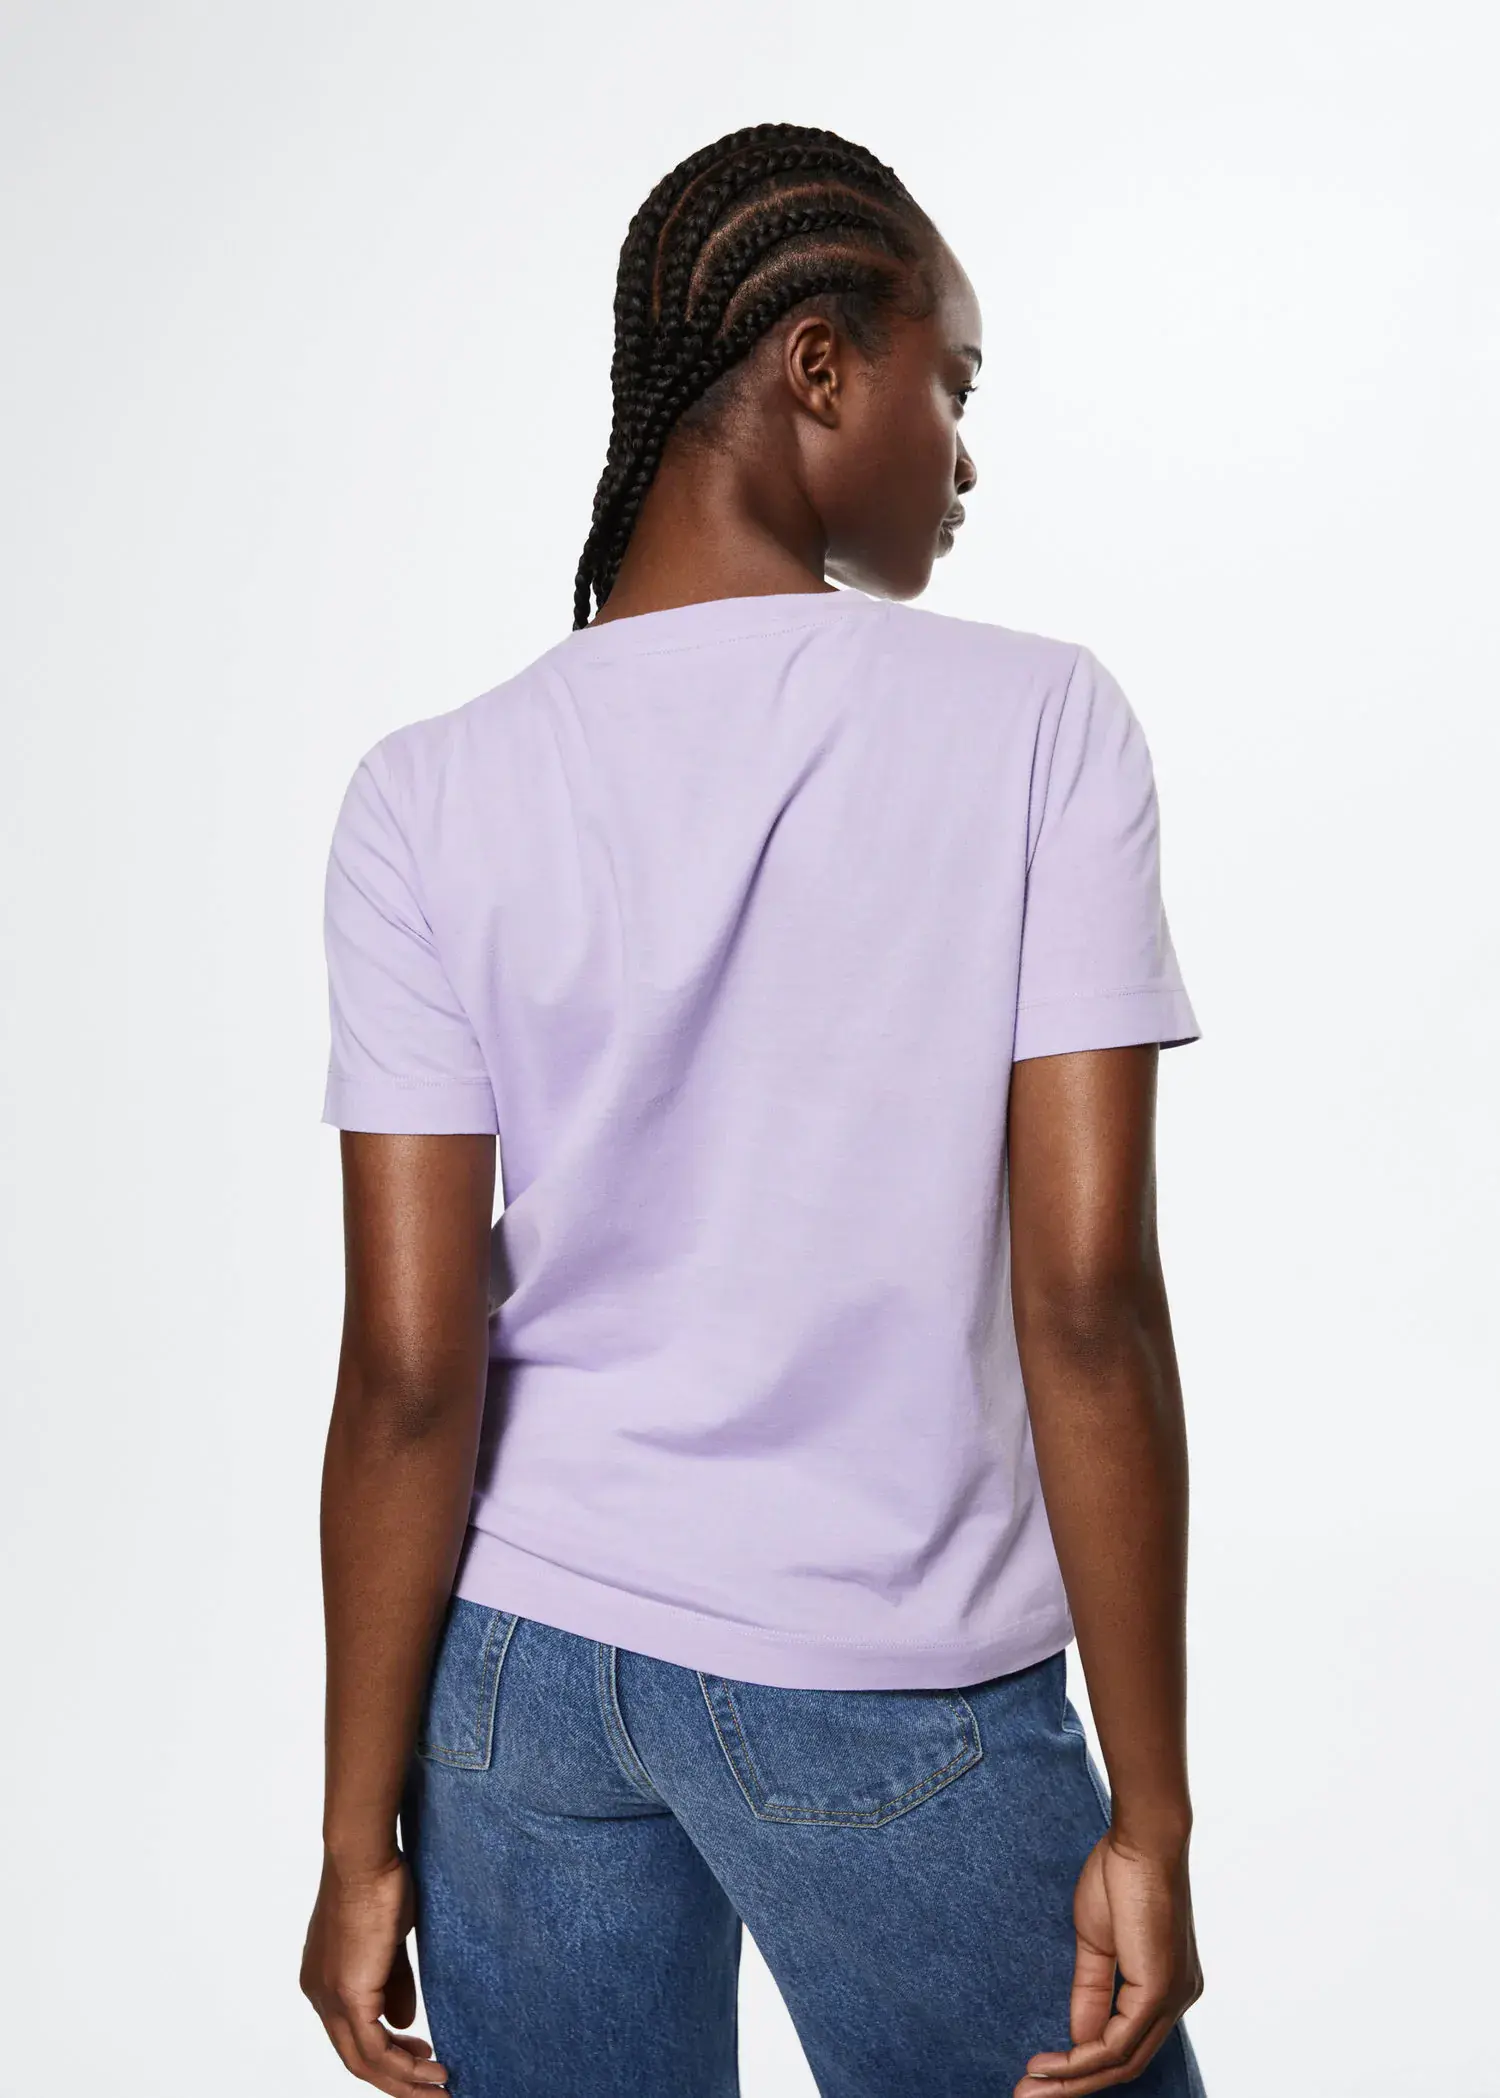 Mango 100% cotton T-shirt. a person wearing a purple shirt and jeans. 